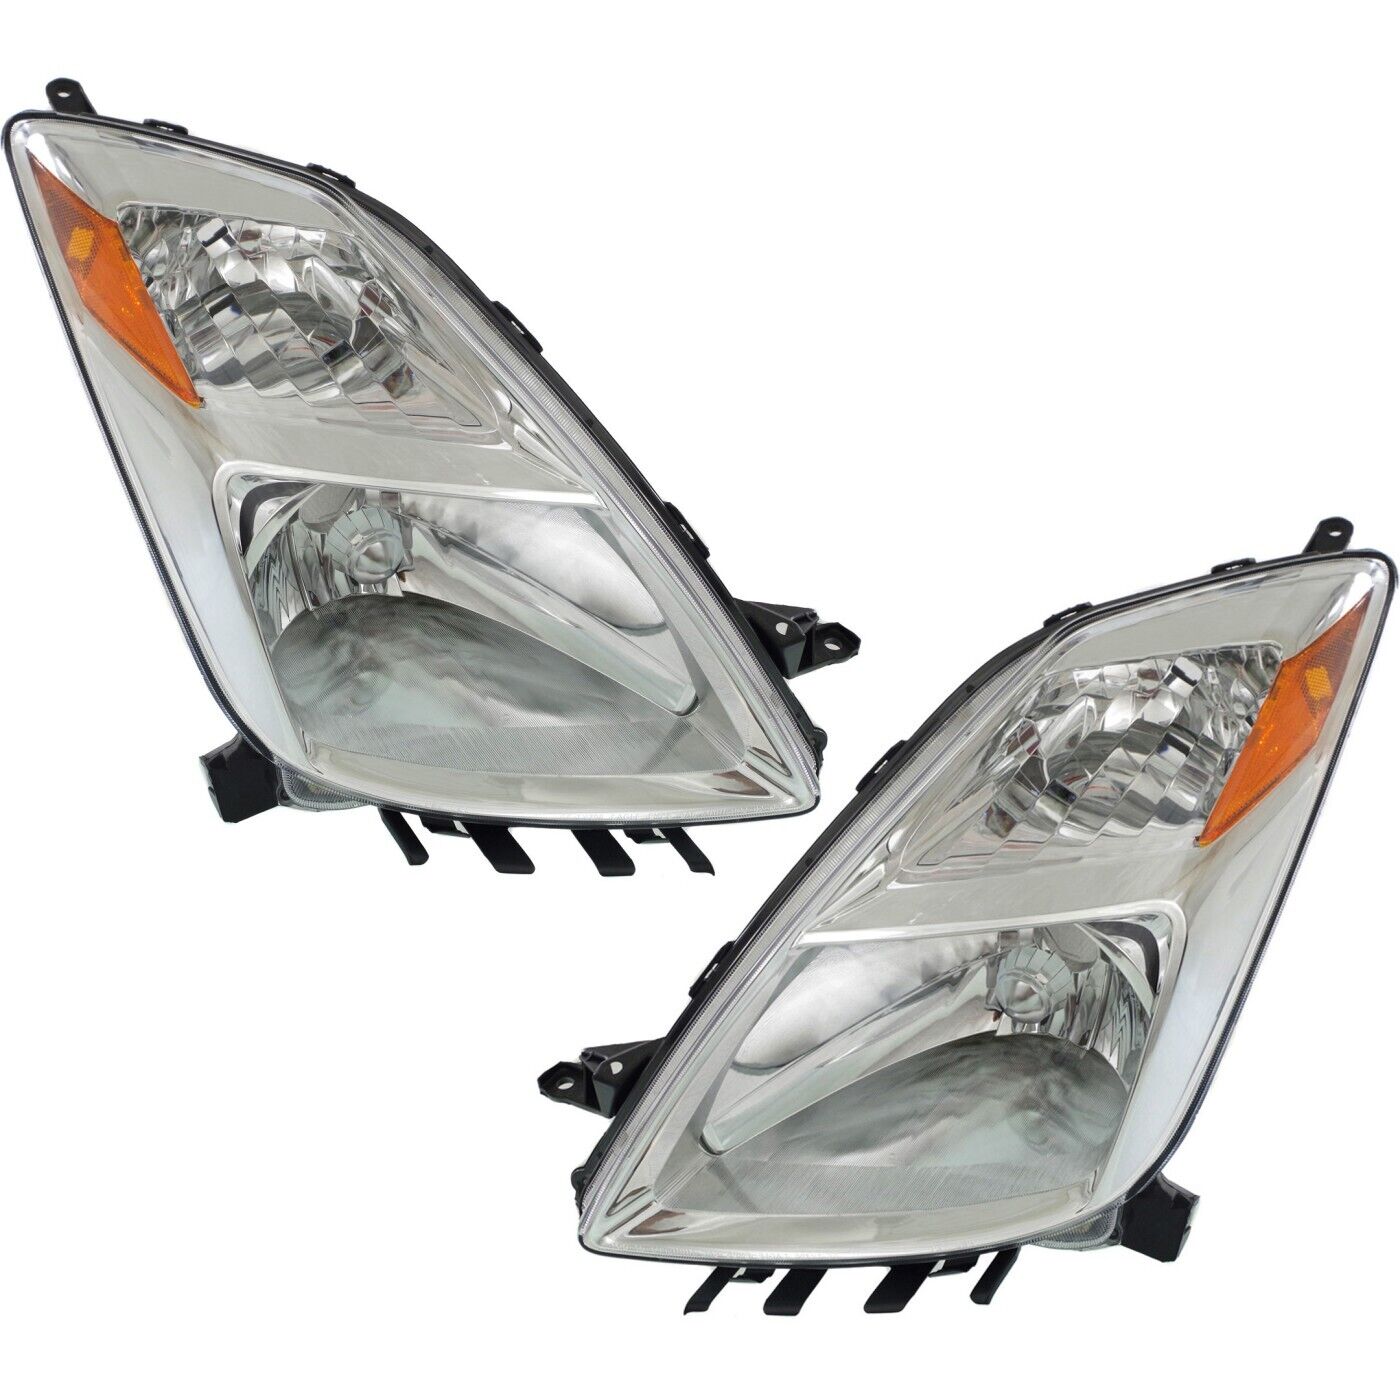 Headlight Set For 2004-2006 Toyota Prius Left and Right Pair Halogen